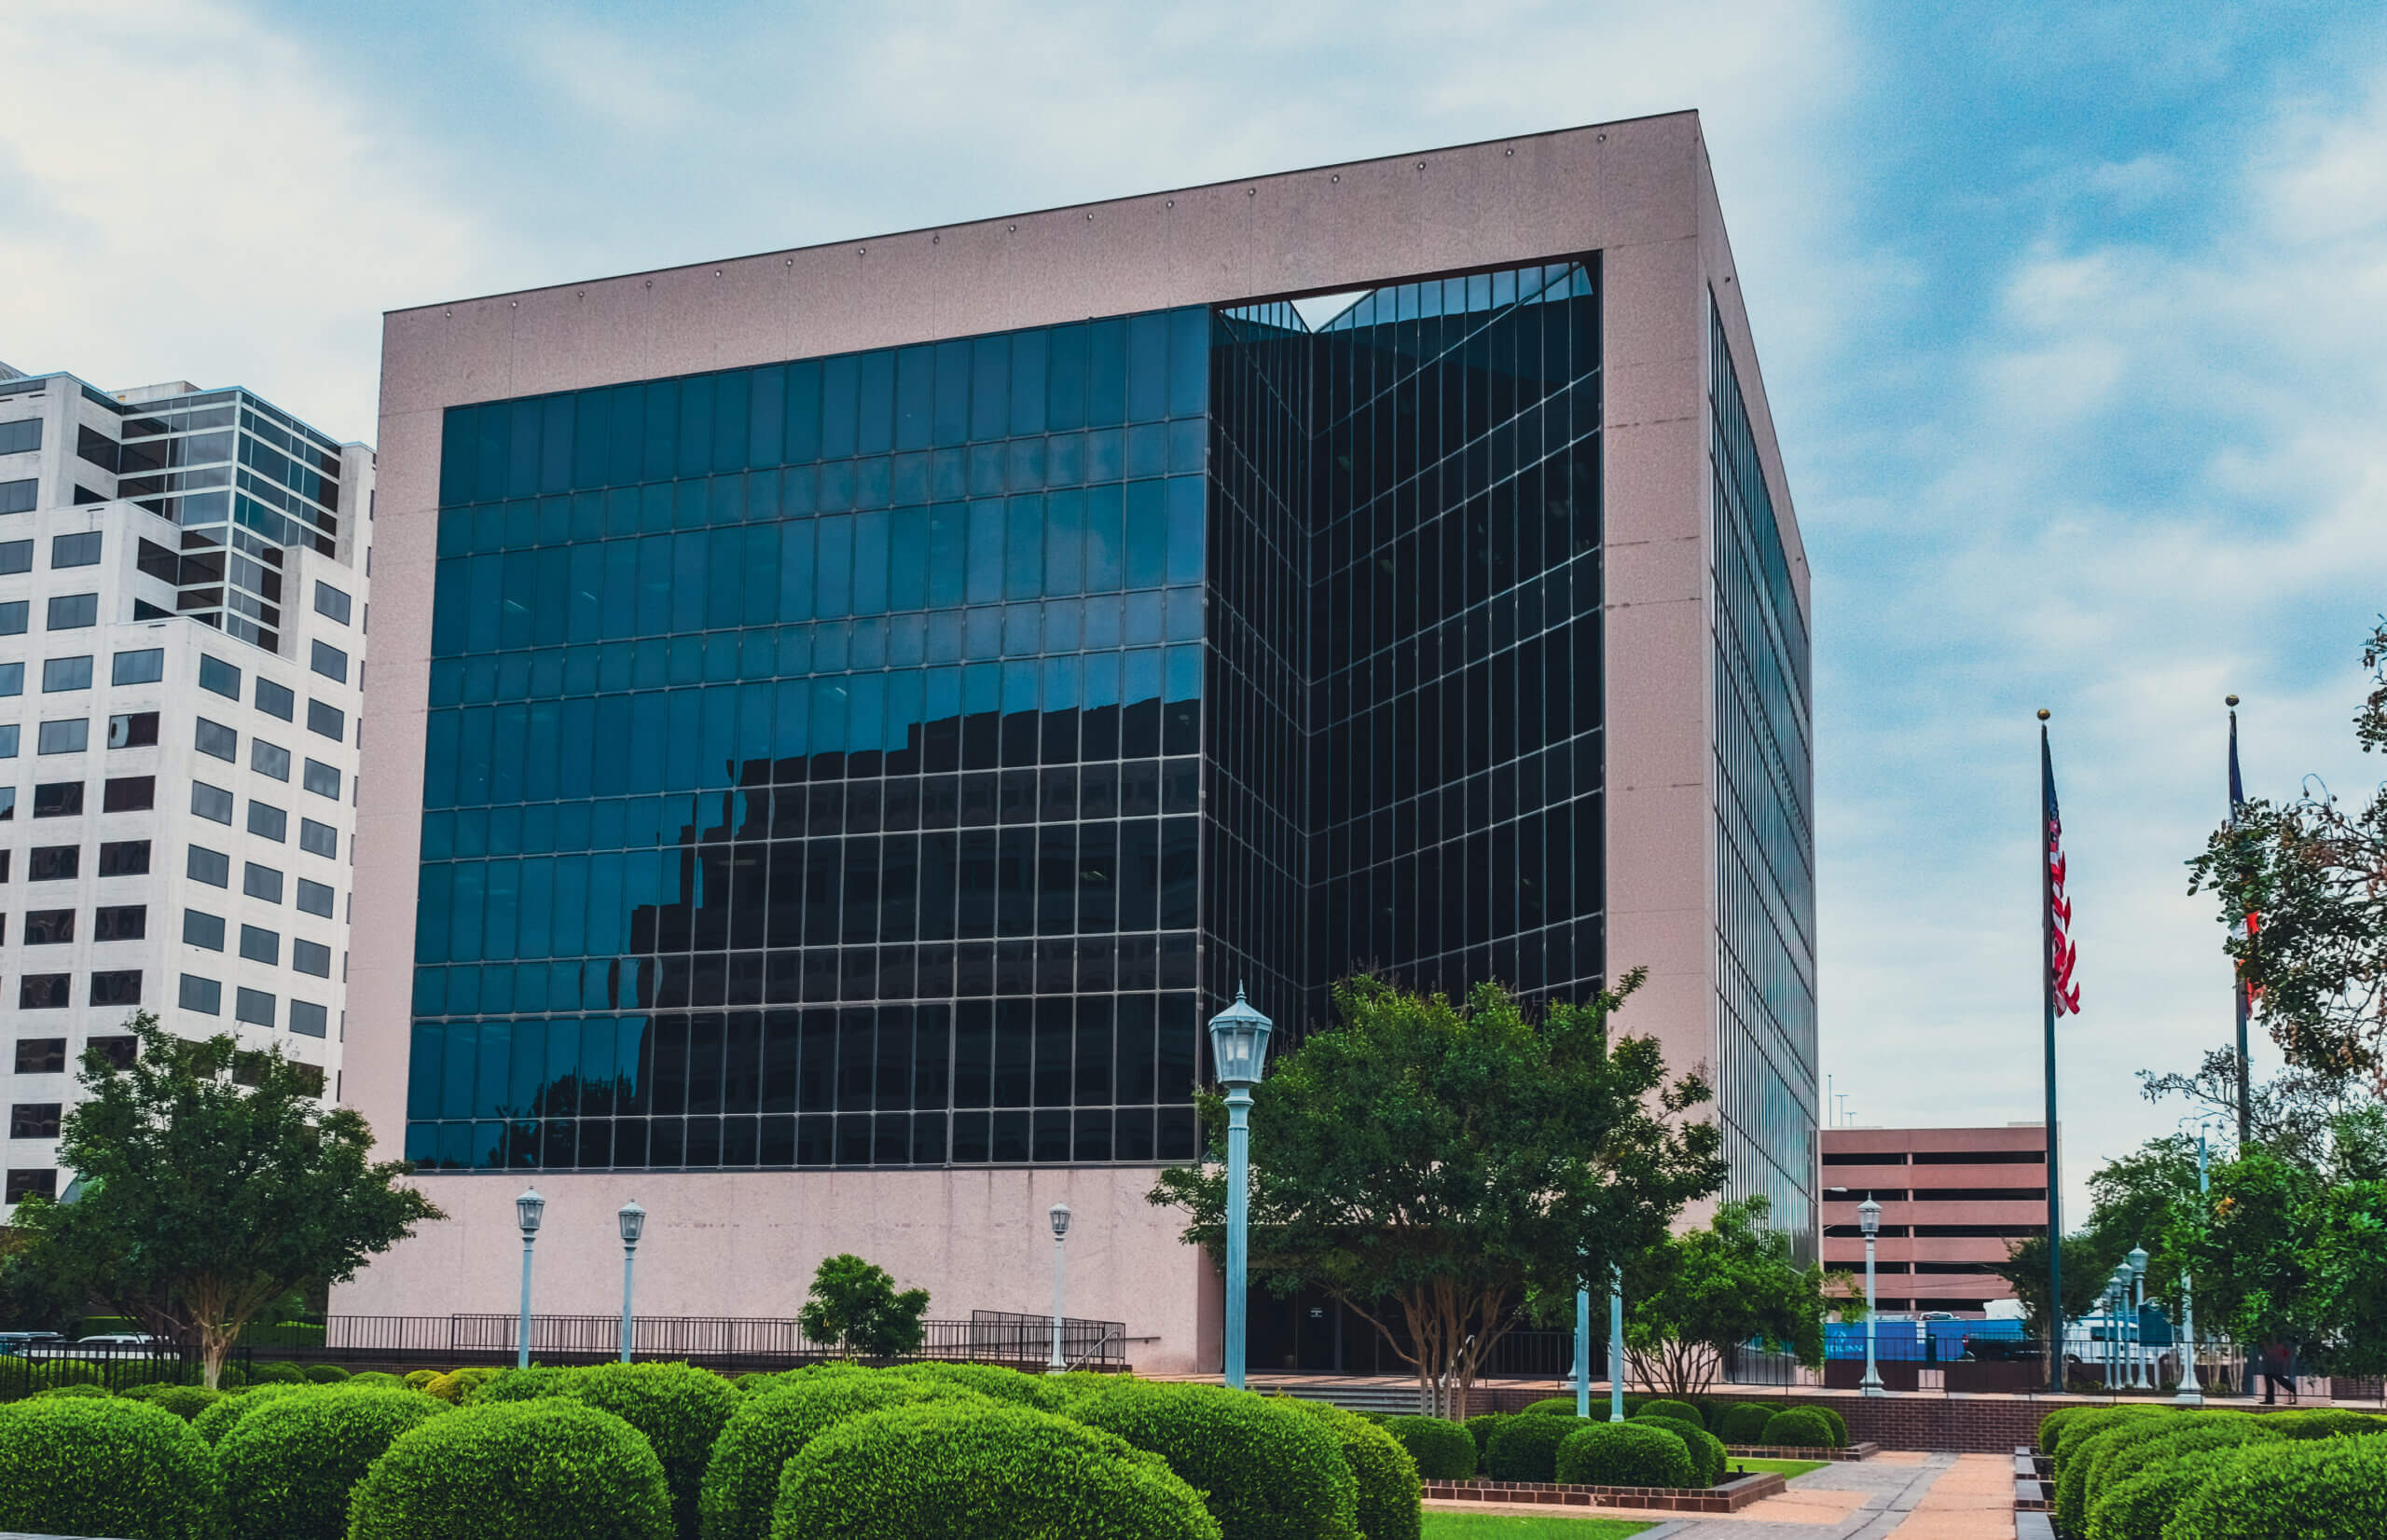 The Texas Law Center